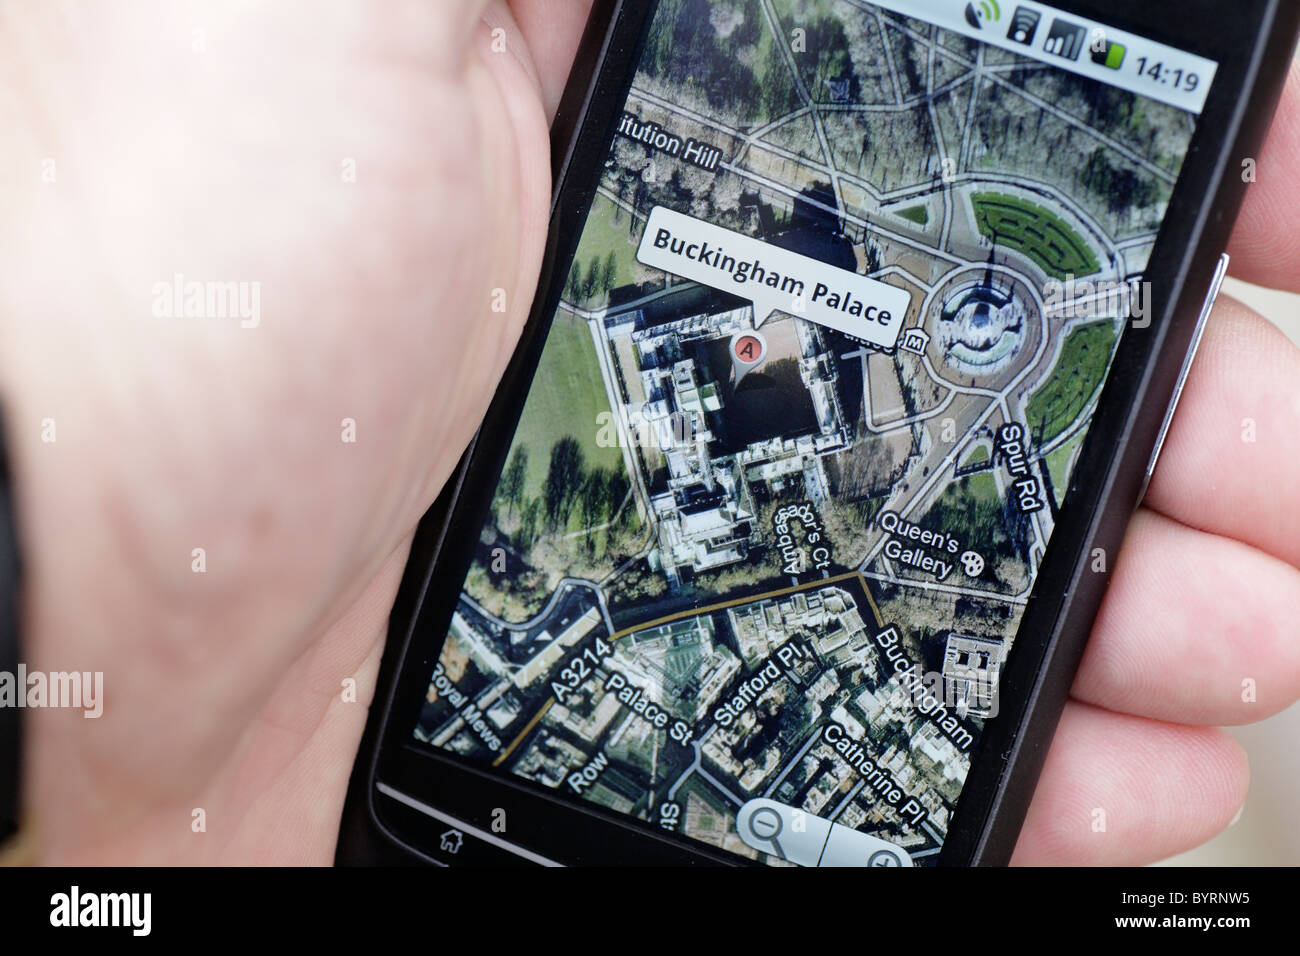 Man looking at google GPS maps map of Buckingham Palace London on a touch screen smartphone in a wifi hotspot closeup Stock Photo